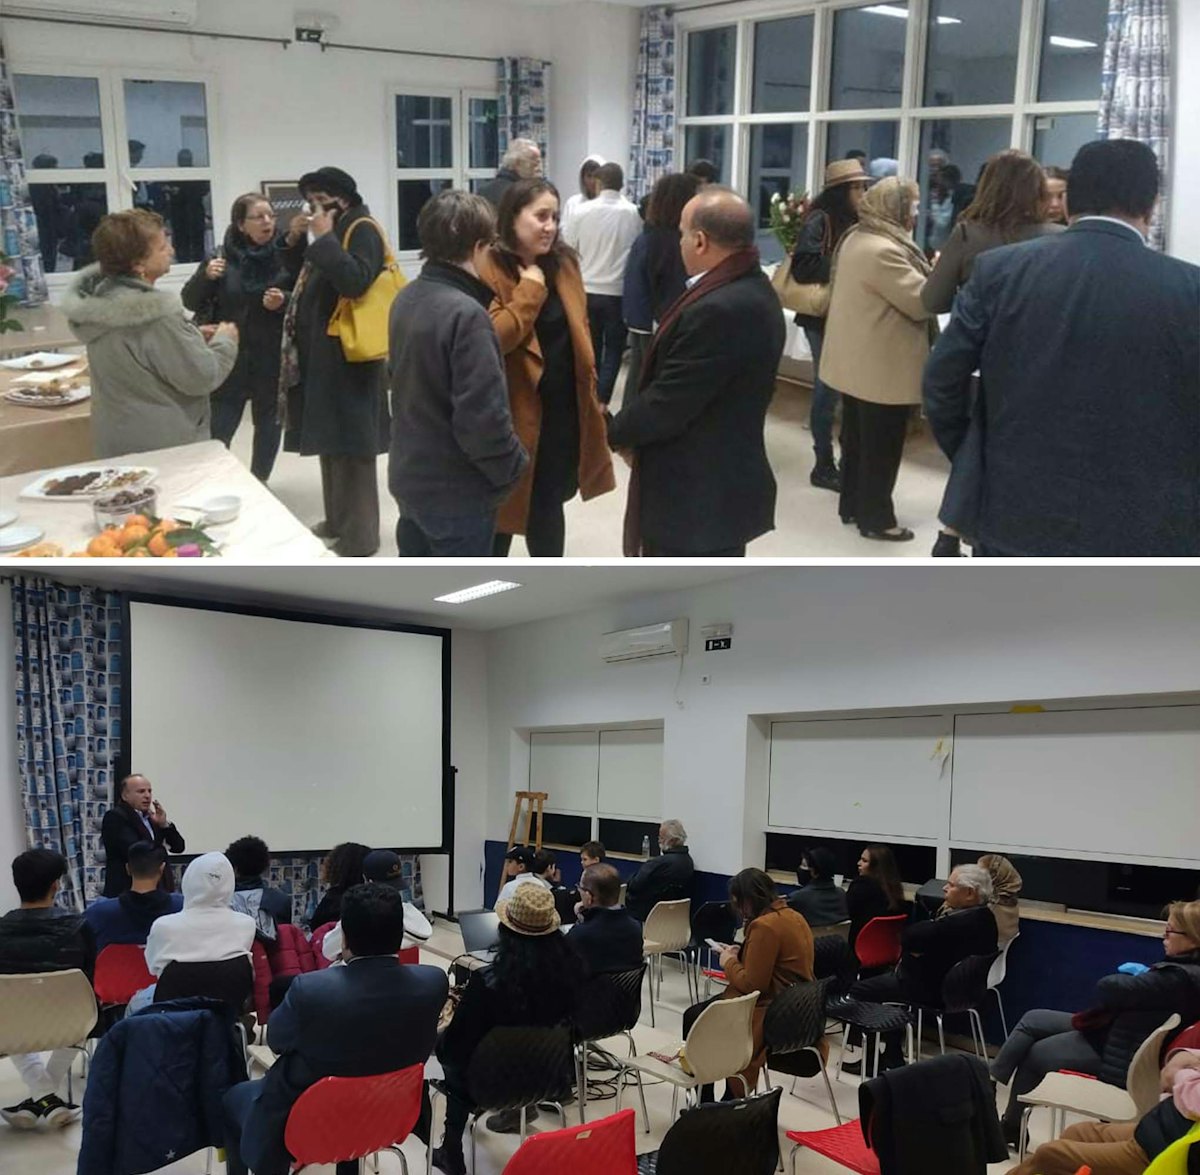 A screening of Exemplar in Tunisia. Participants discussed ‘Abdu’l-Bahá’s exemplary life after the screening (top).